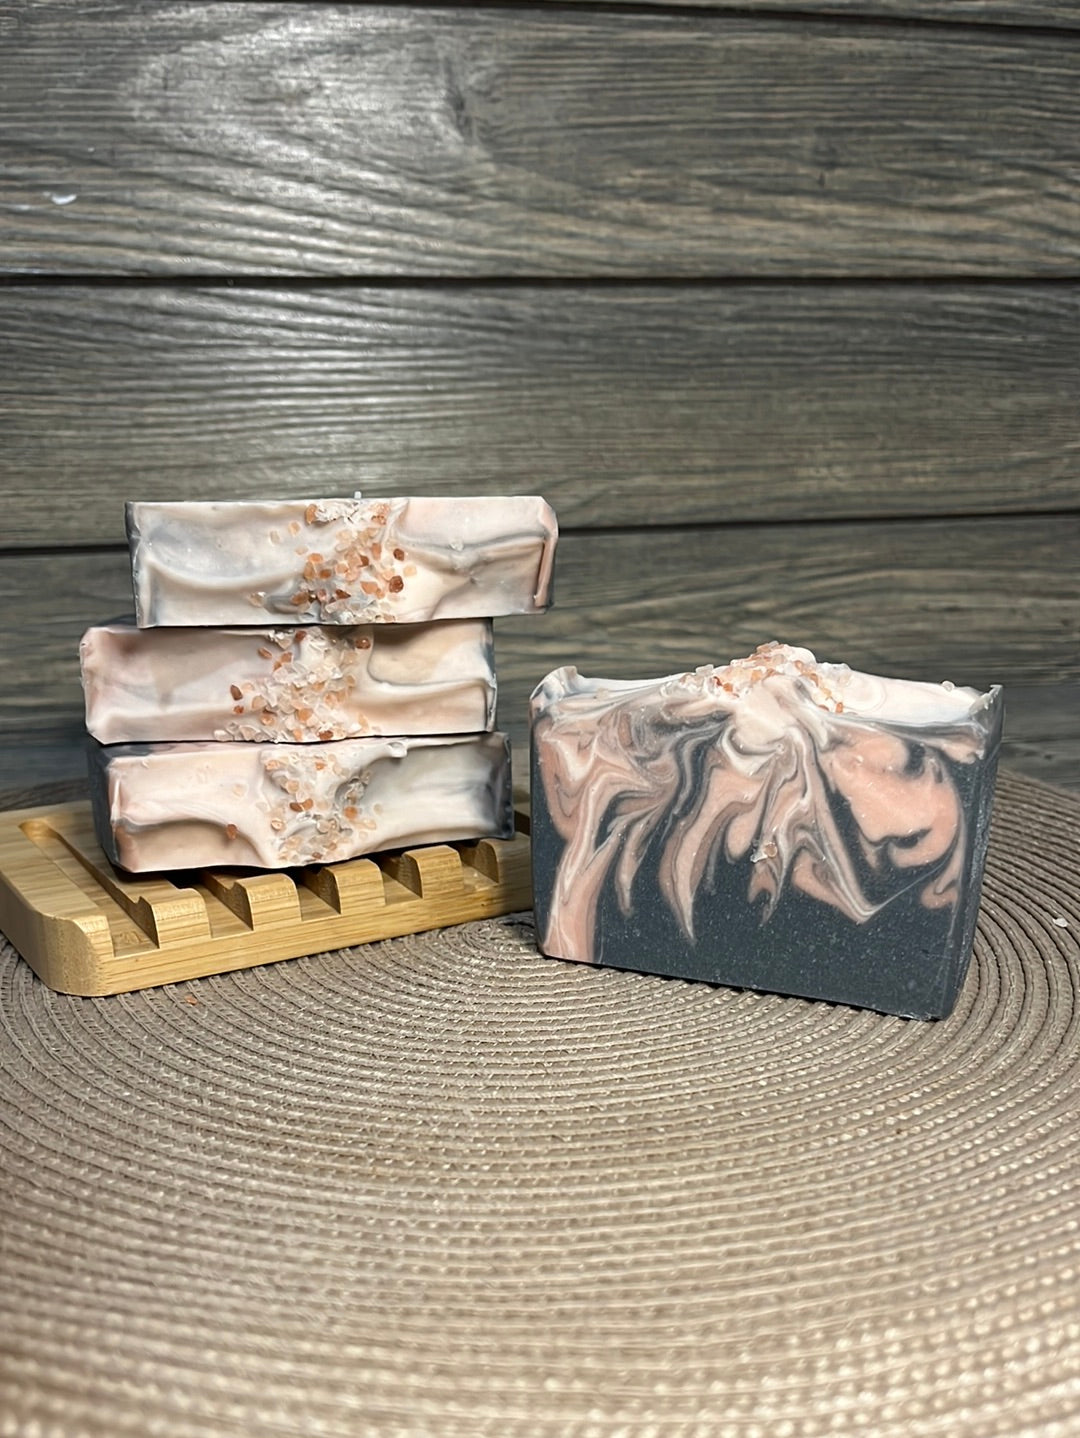 Unscented tallow soap